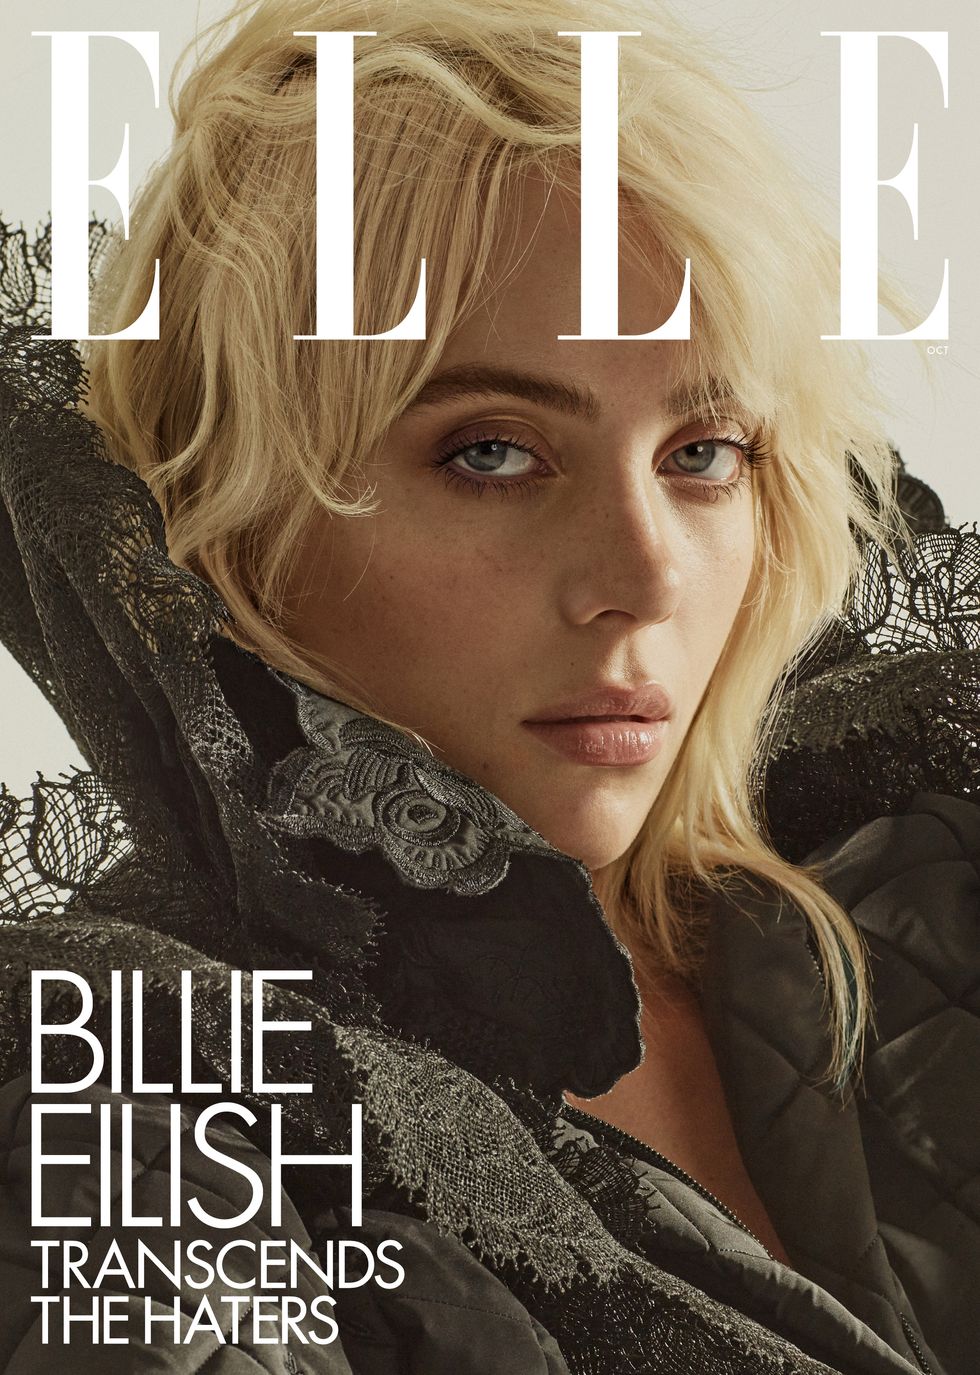 the elle cover shows billie eilish in a black dress with a high lace collar